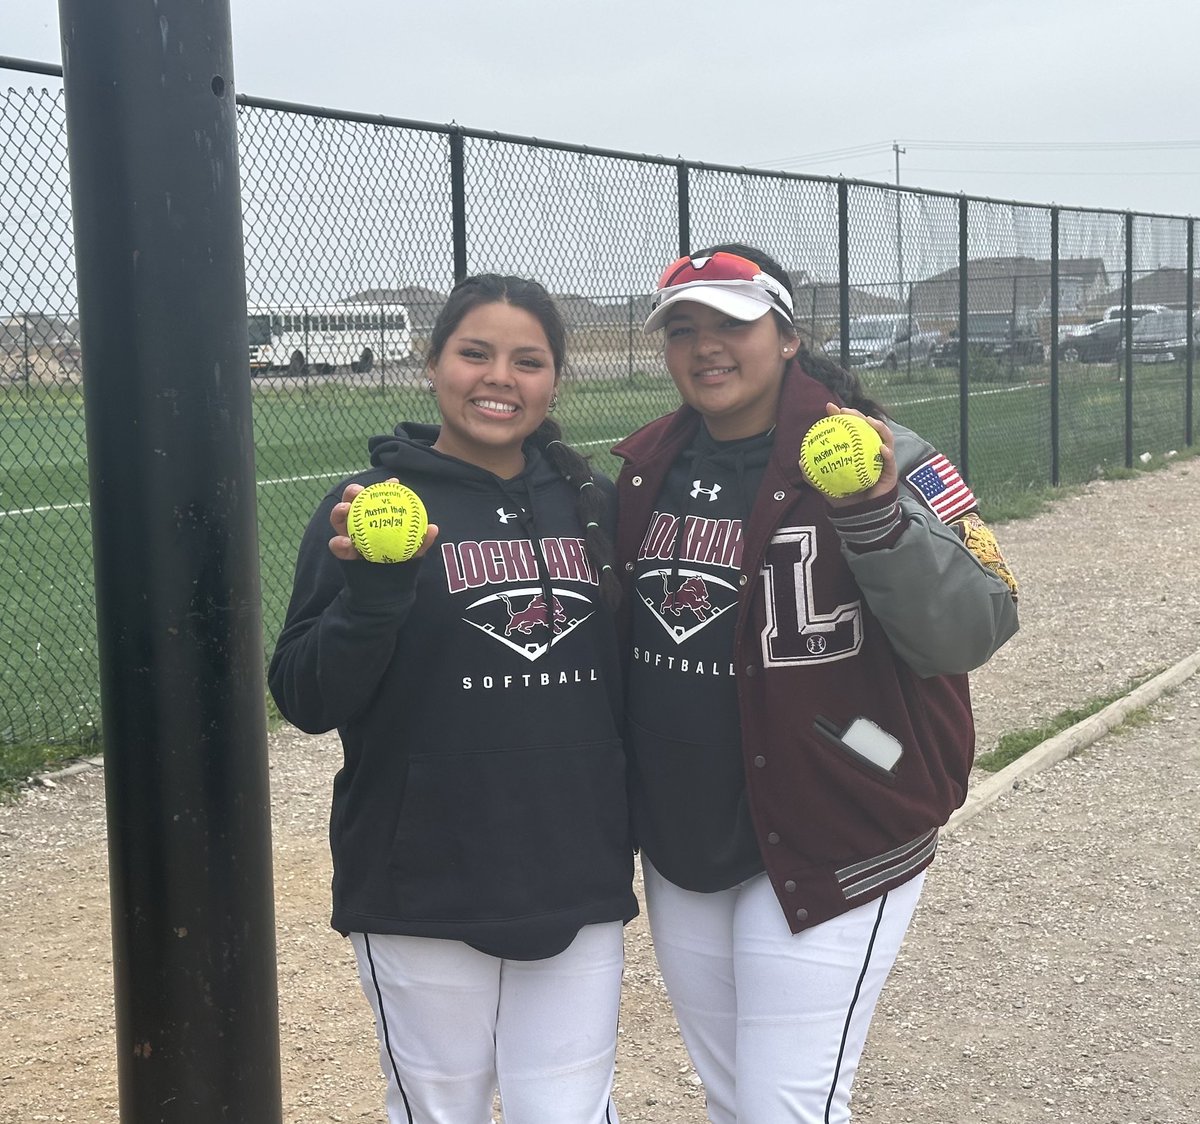 Lady Lions bats were on fire this Thursday at the Heart of Hays tourney hitting 2 home runs, while playing error free defense! Way to go Lady Lions Varsity Softball.